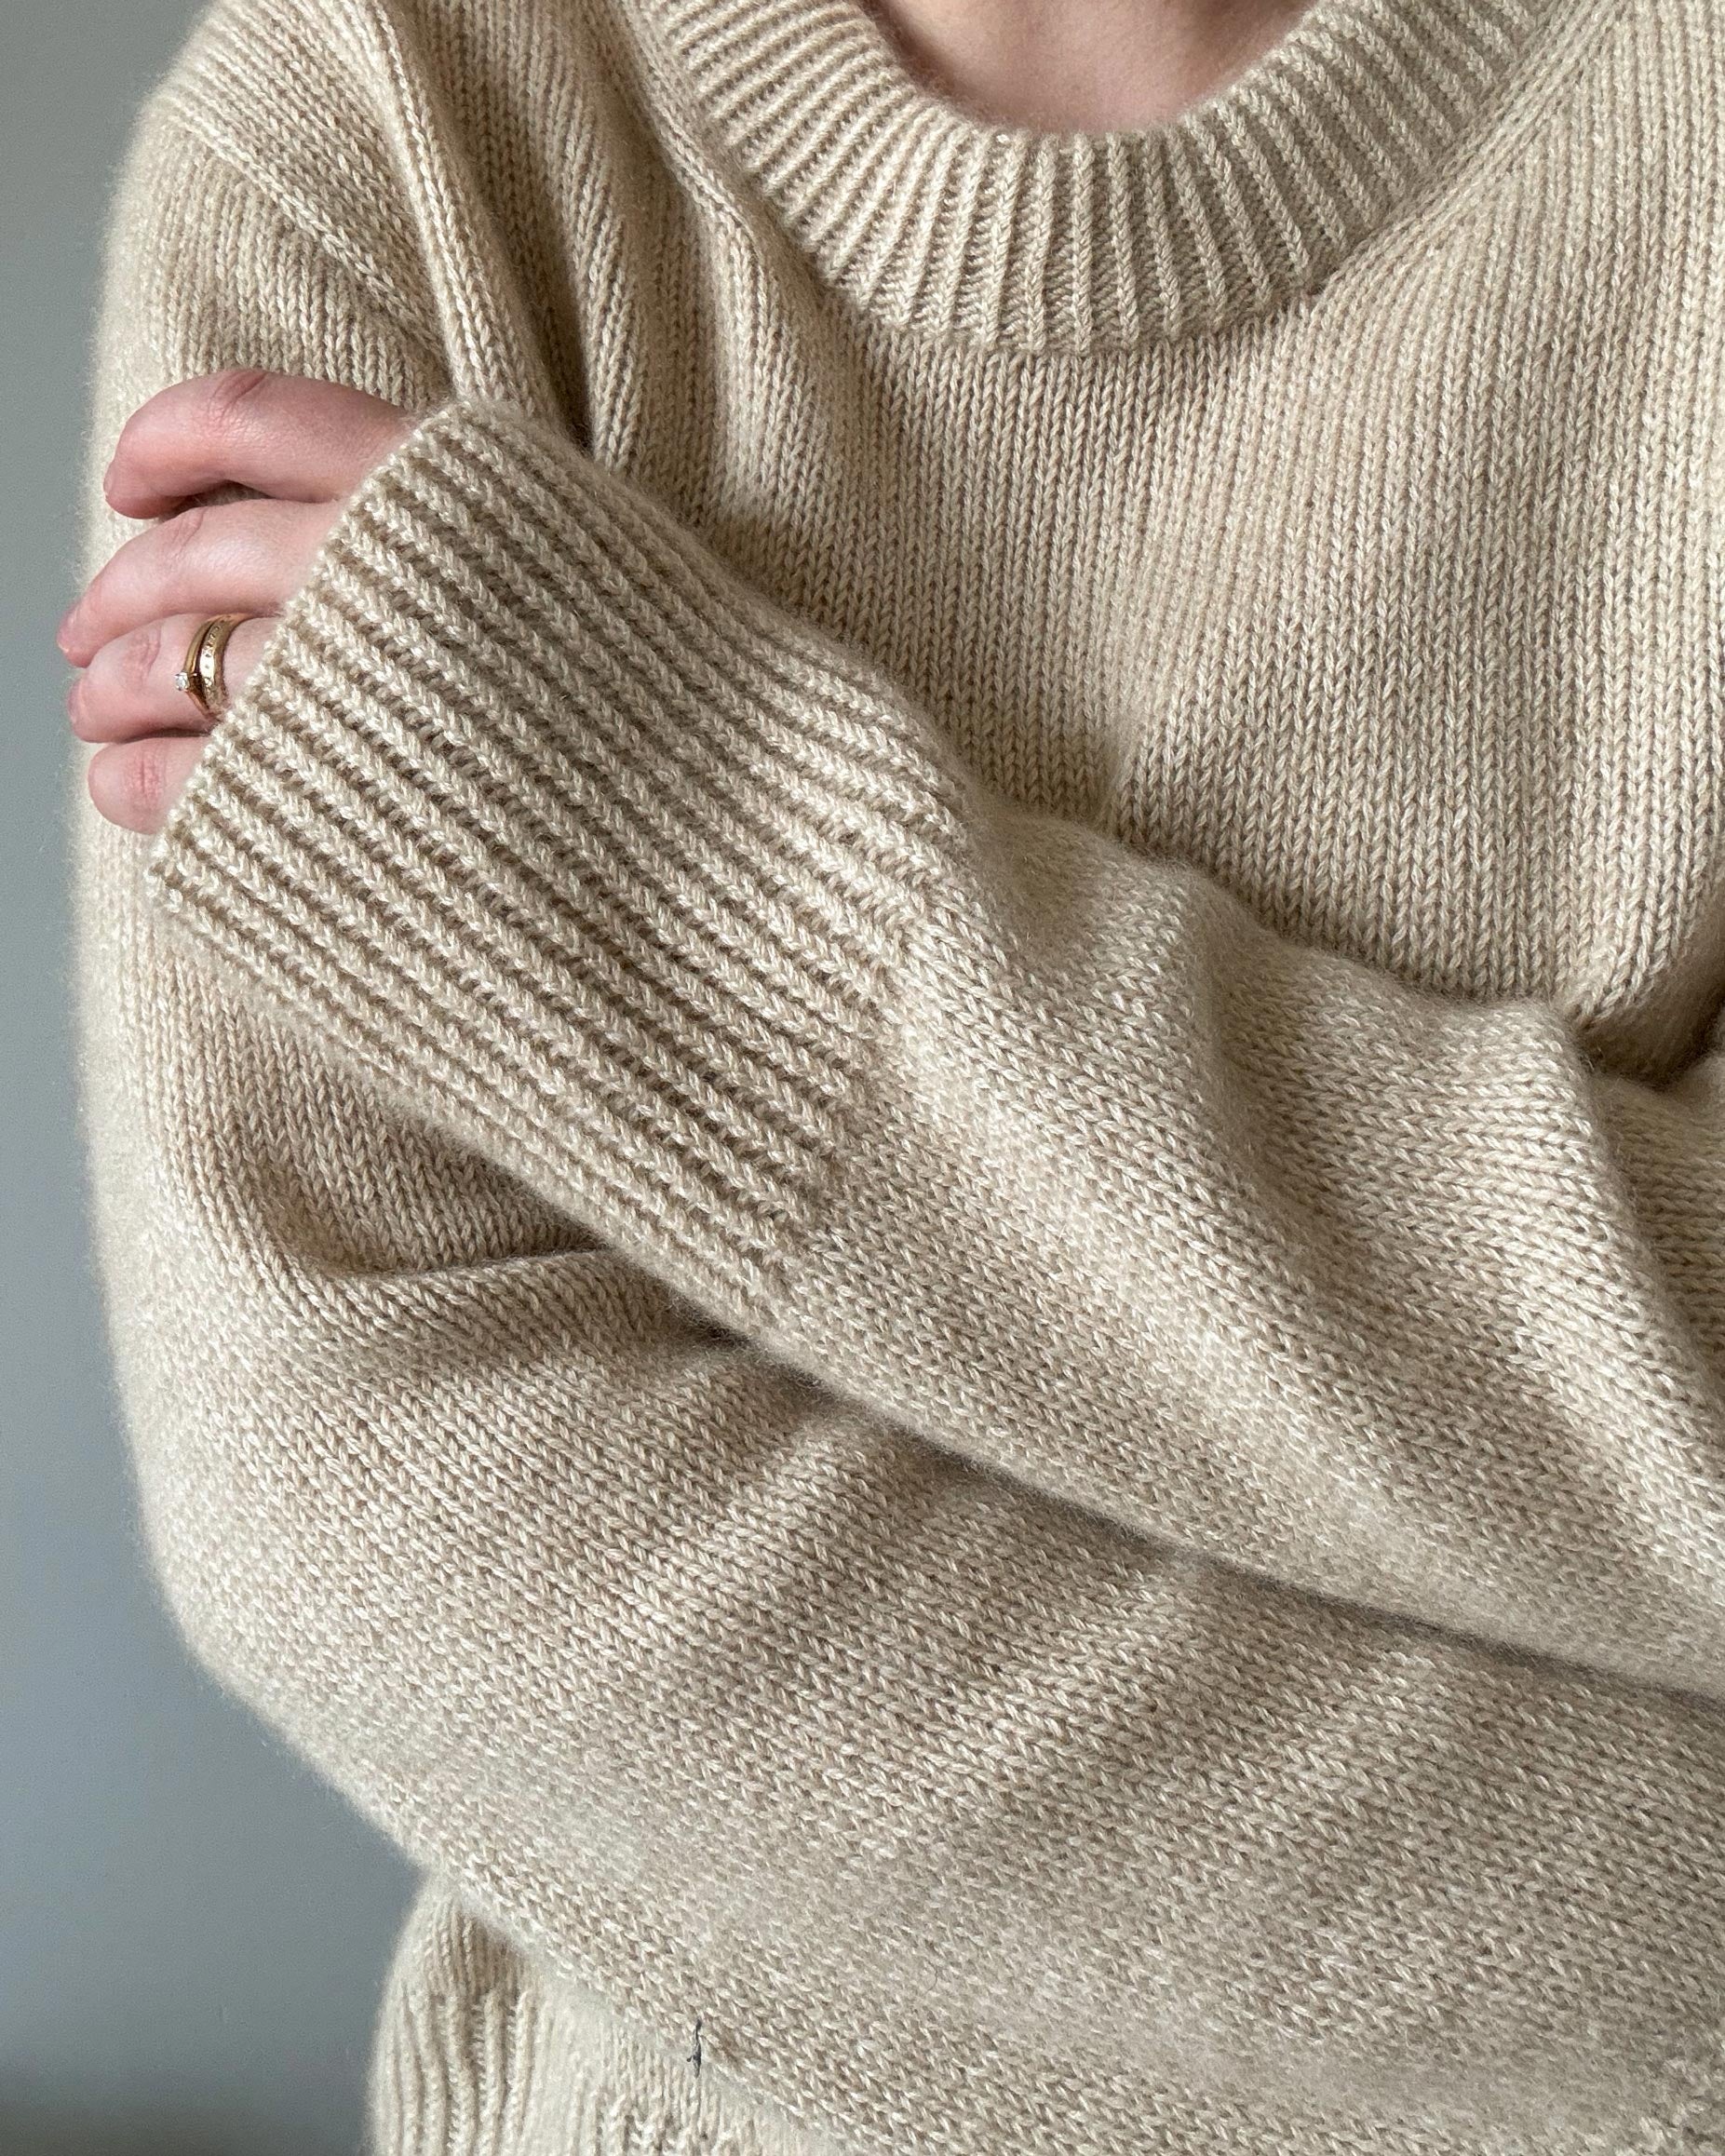 Elegant and soft light beige jumper, Bruno Sweater pattern for ladies, crafted by Morecaknit.